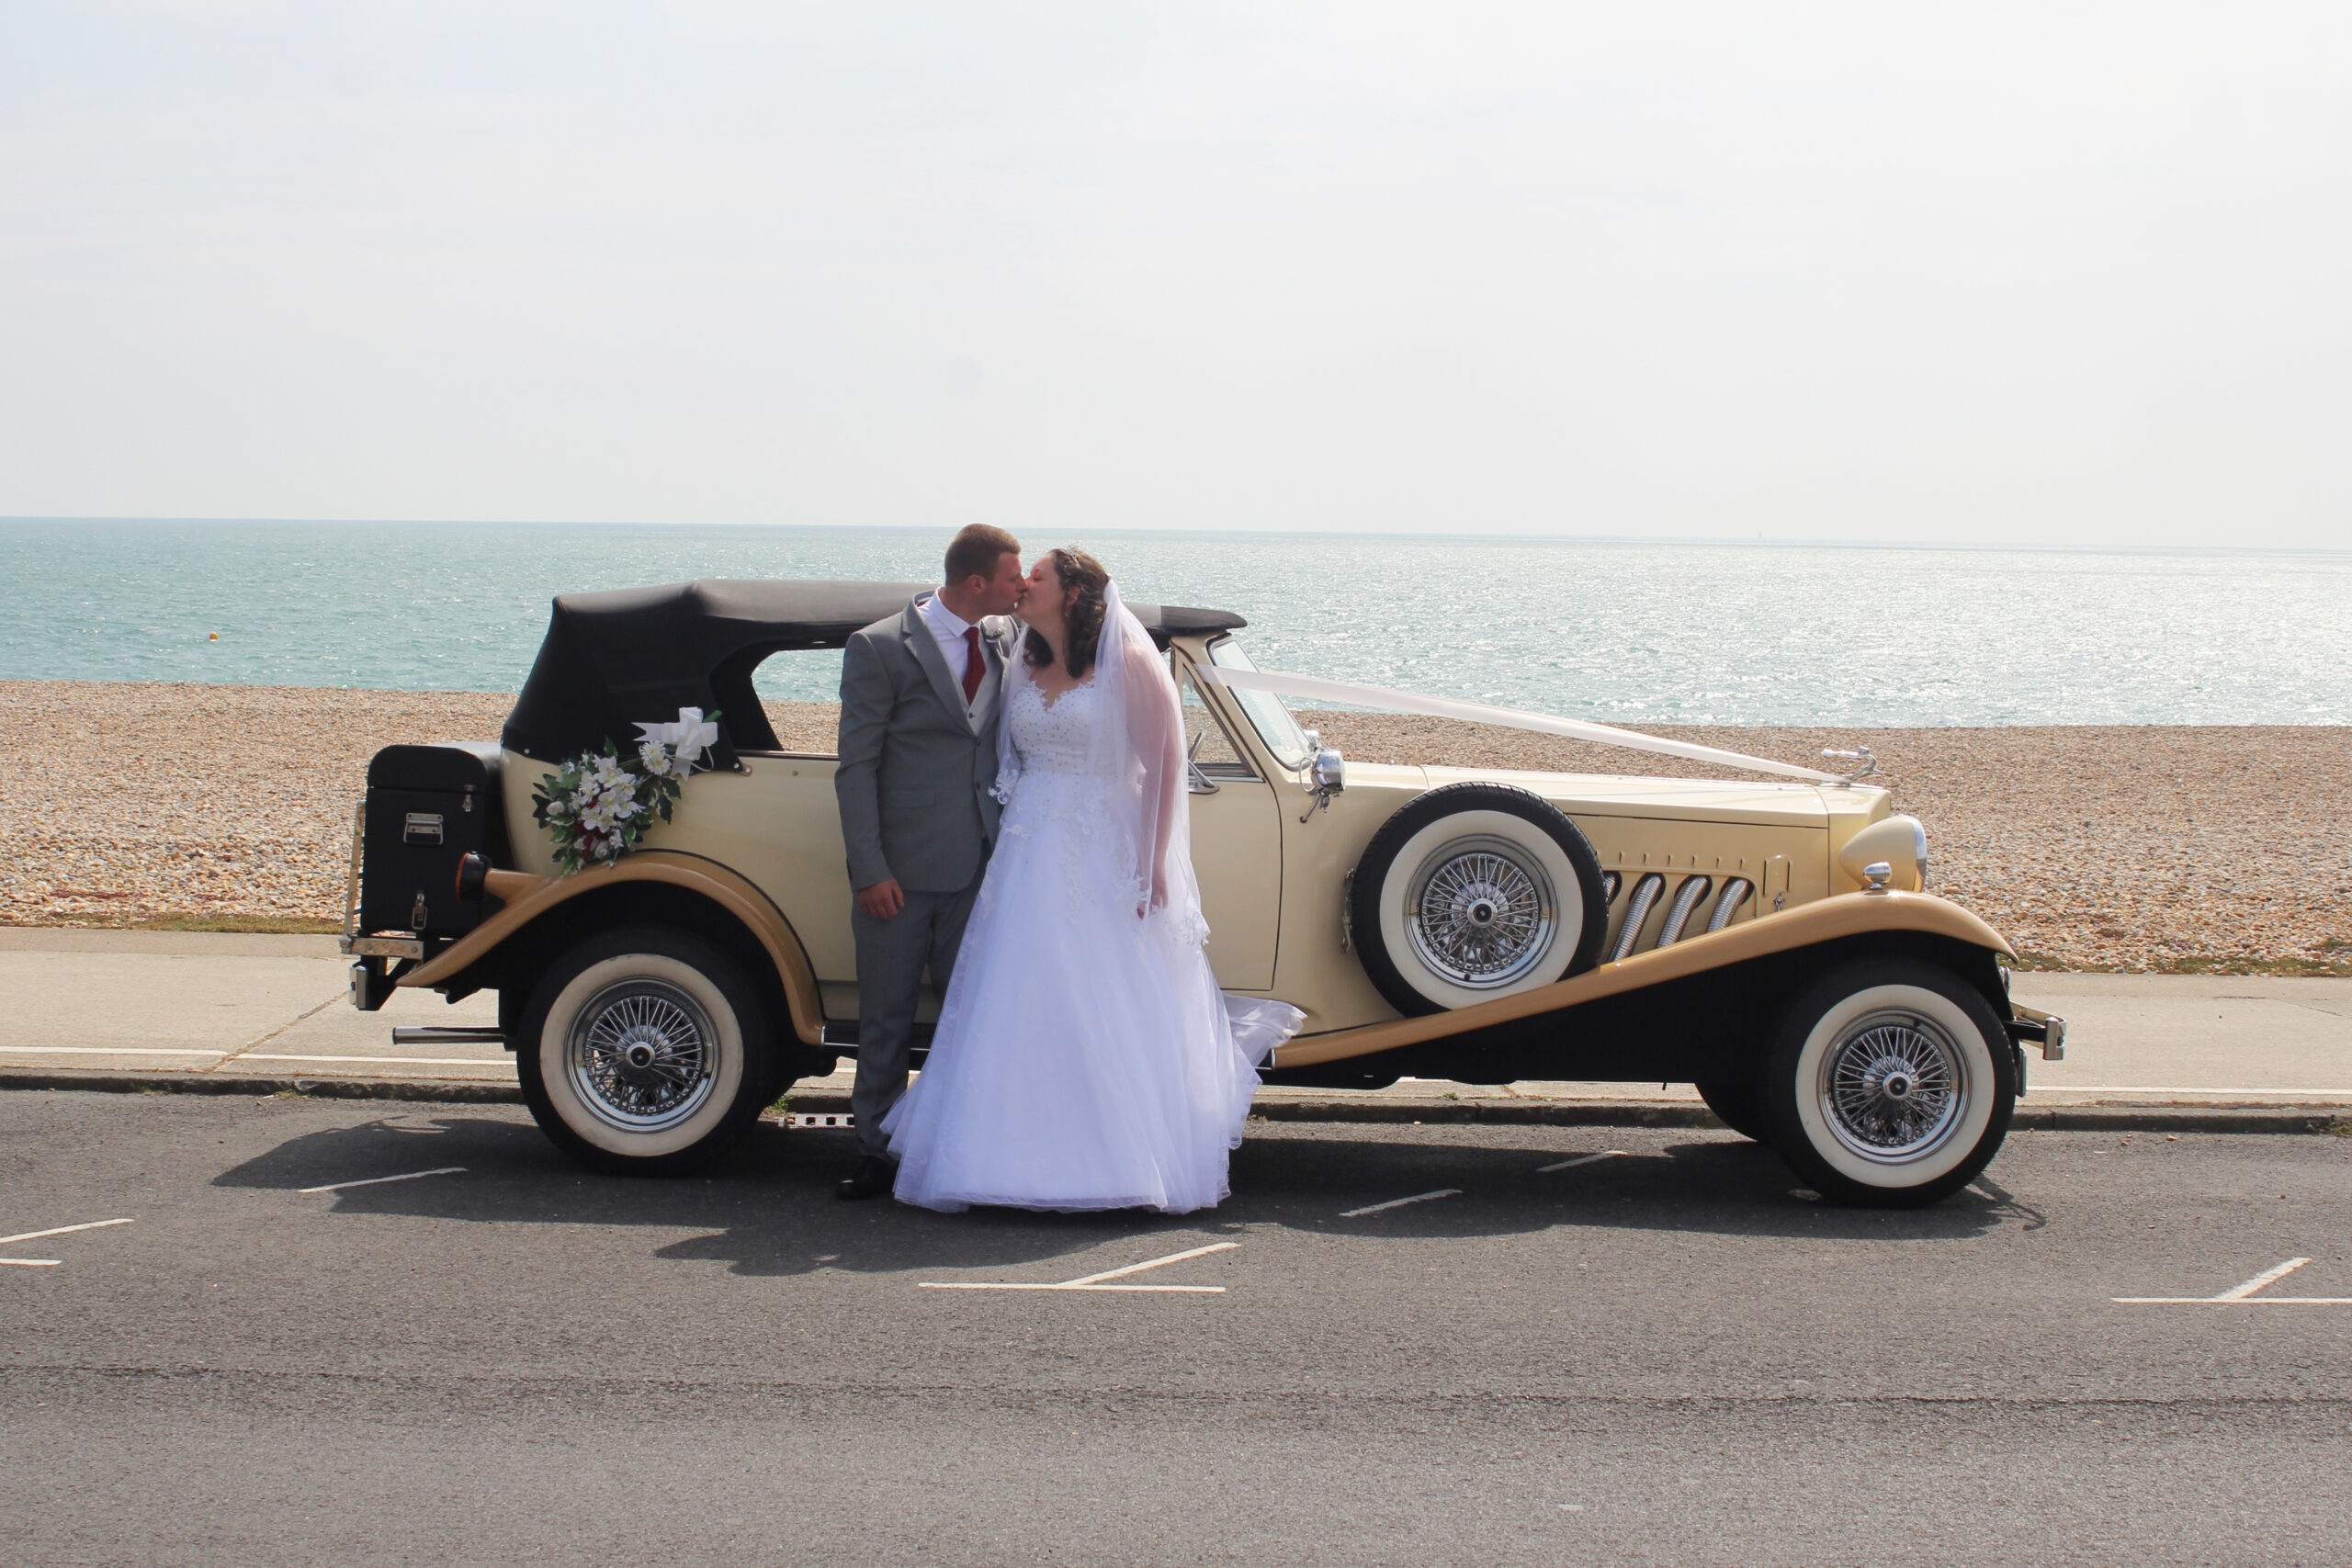 Beauford wedding car with couple, Seaford Seafront, East Sussex